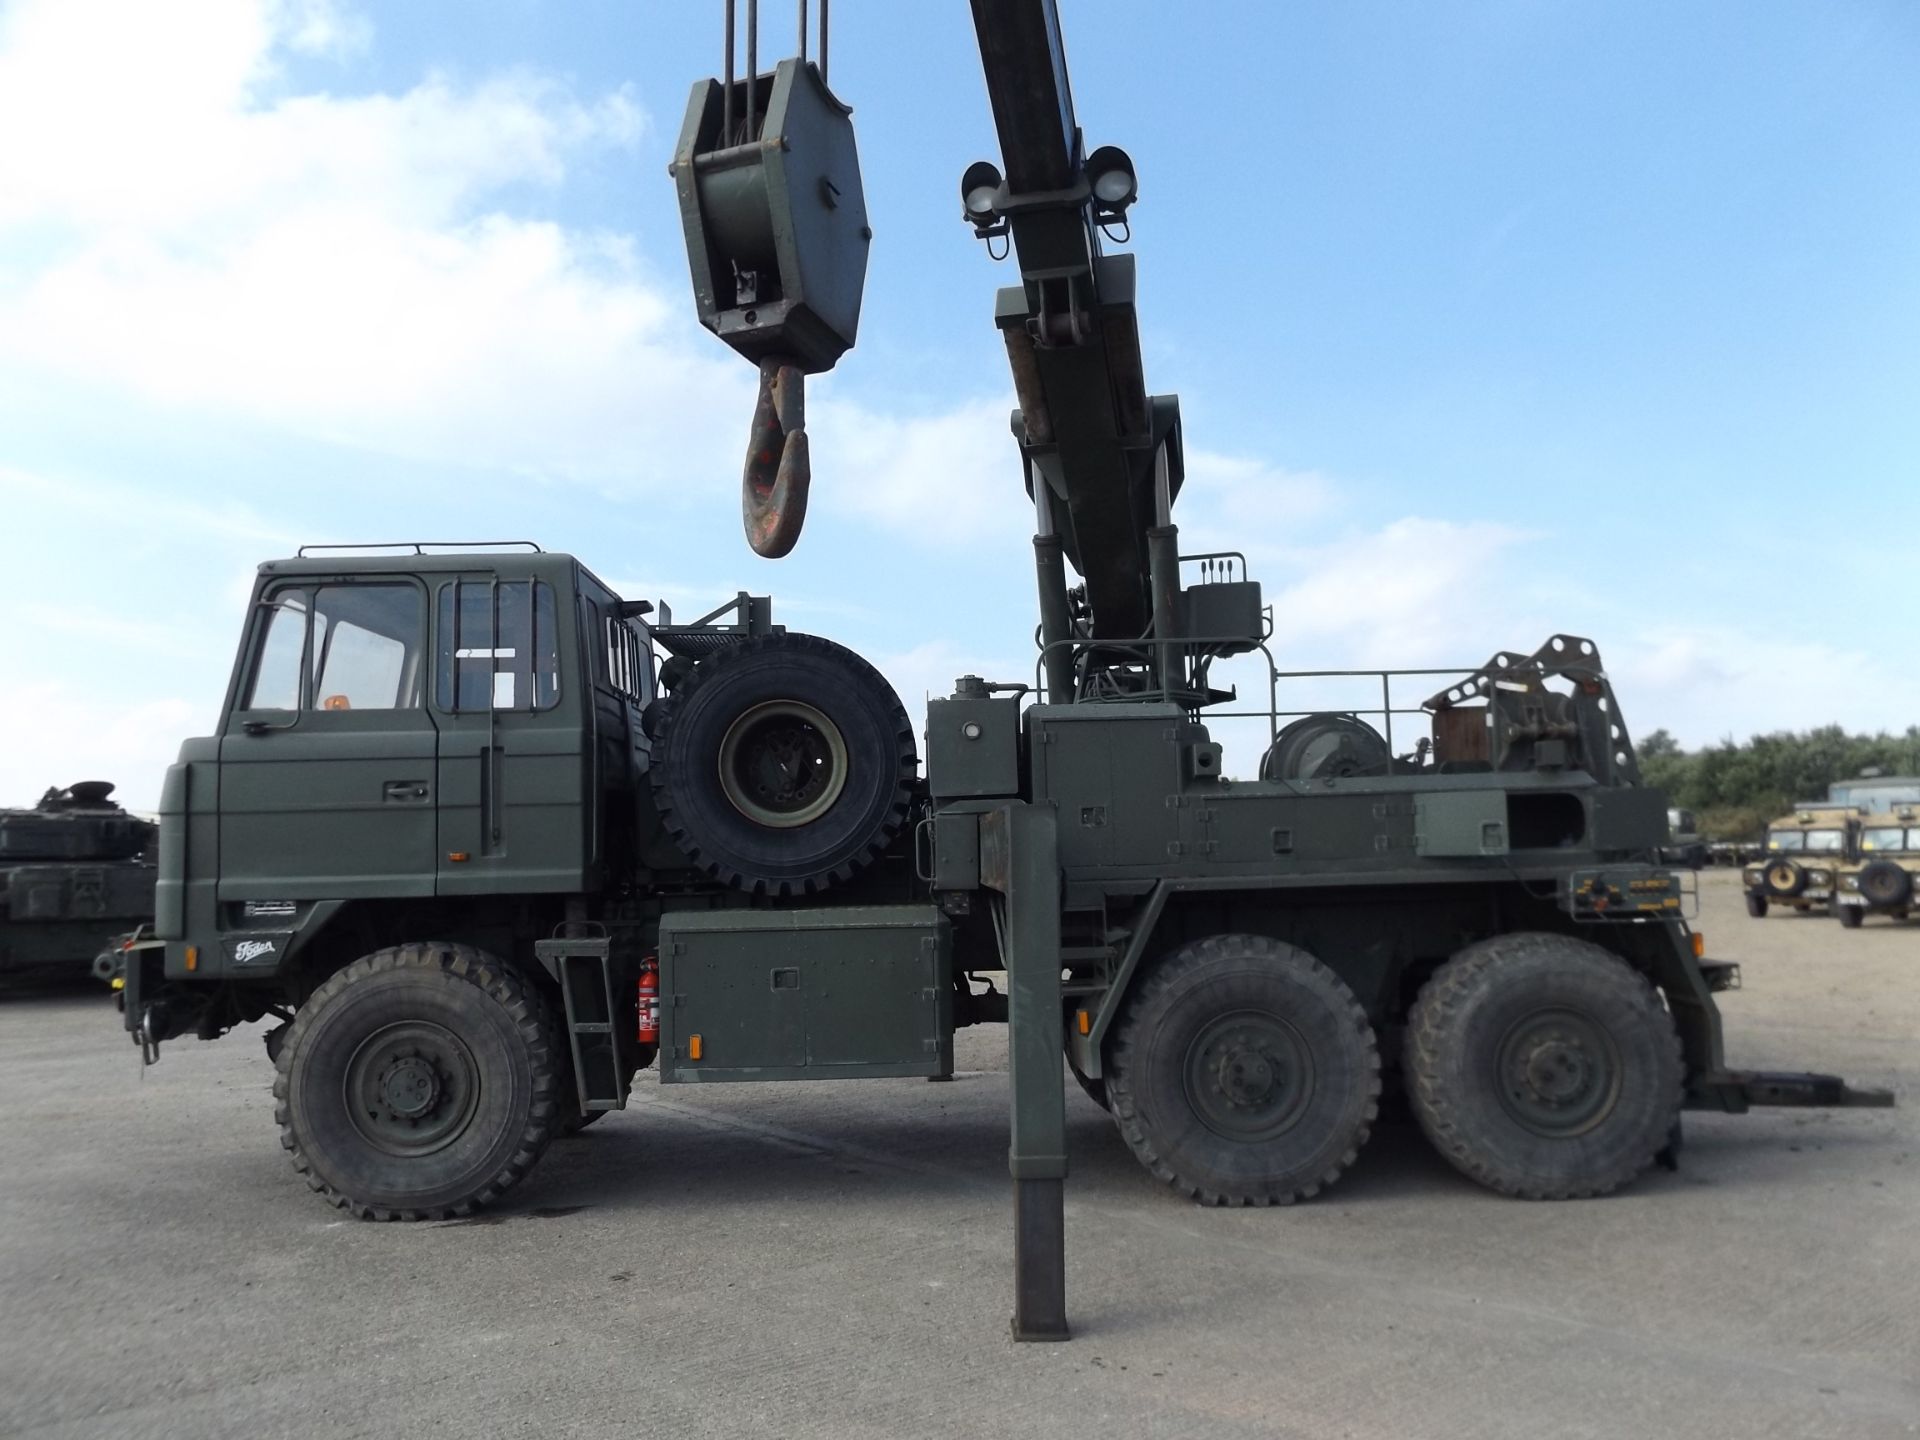 Foden 6x6 Recovery Vehicle which is Complete with Remotes and EKA Recovery Tools - Image 3 of 27